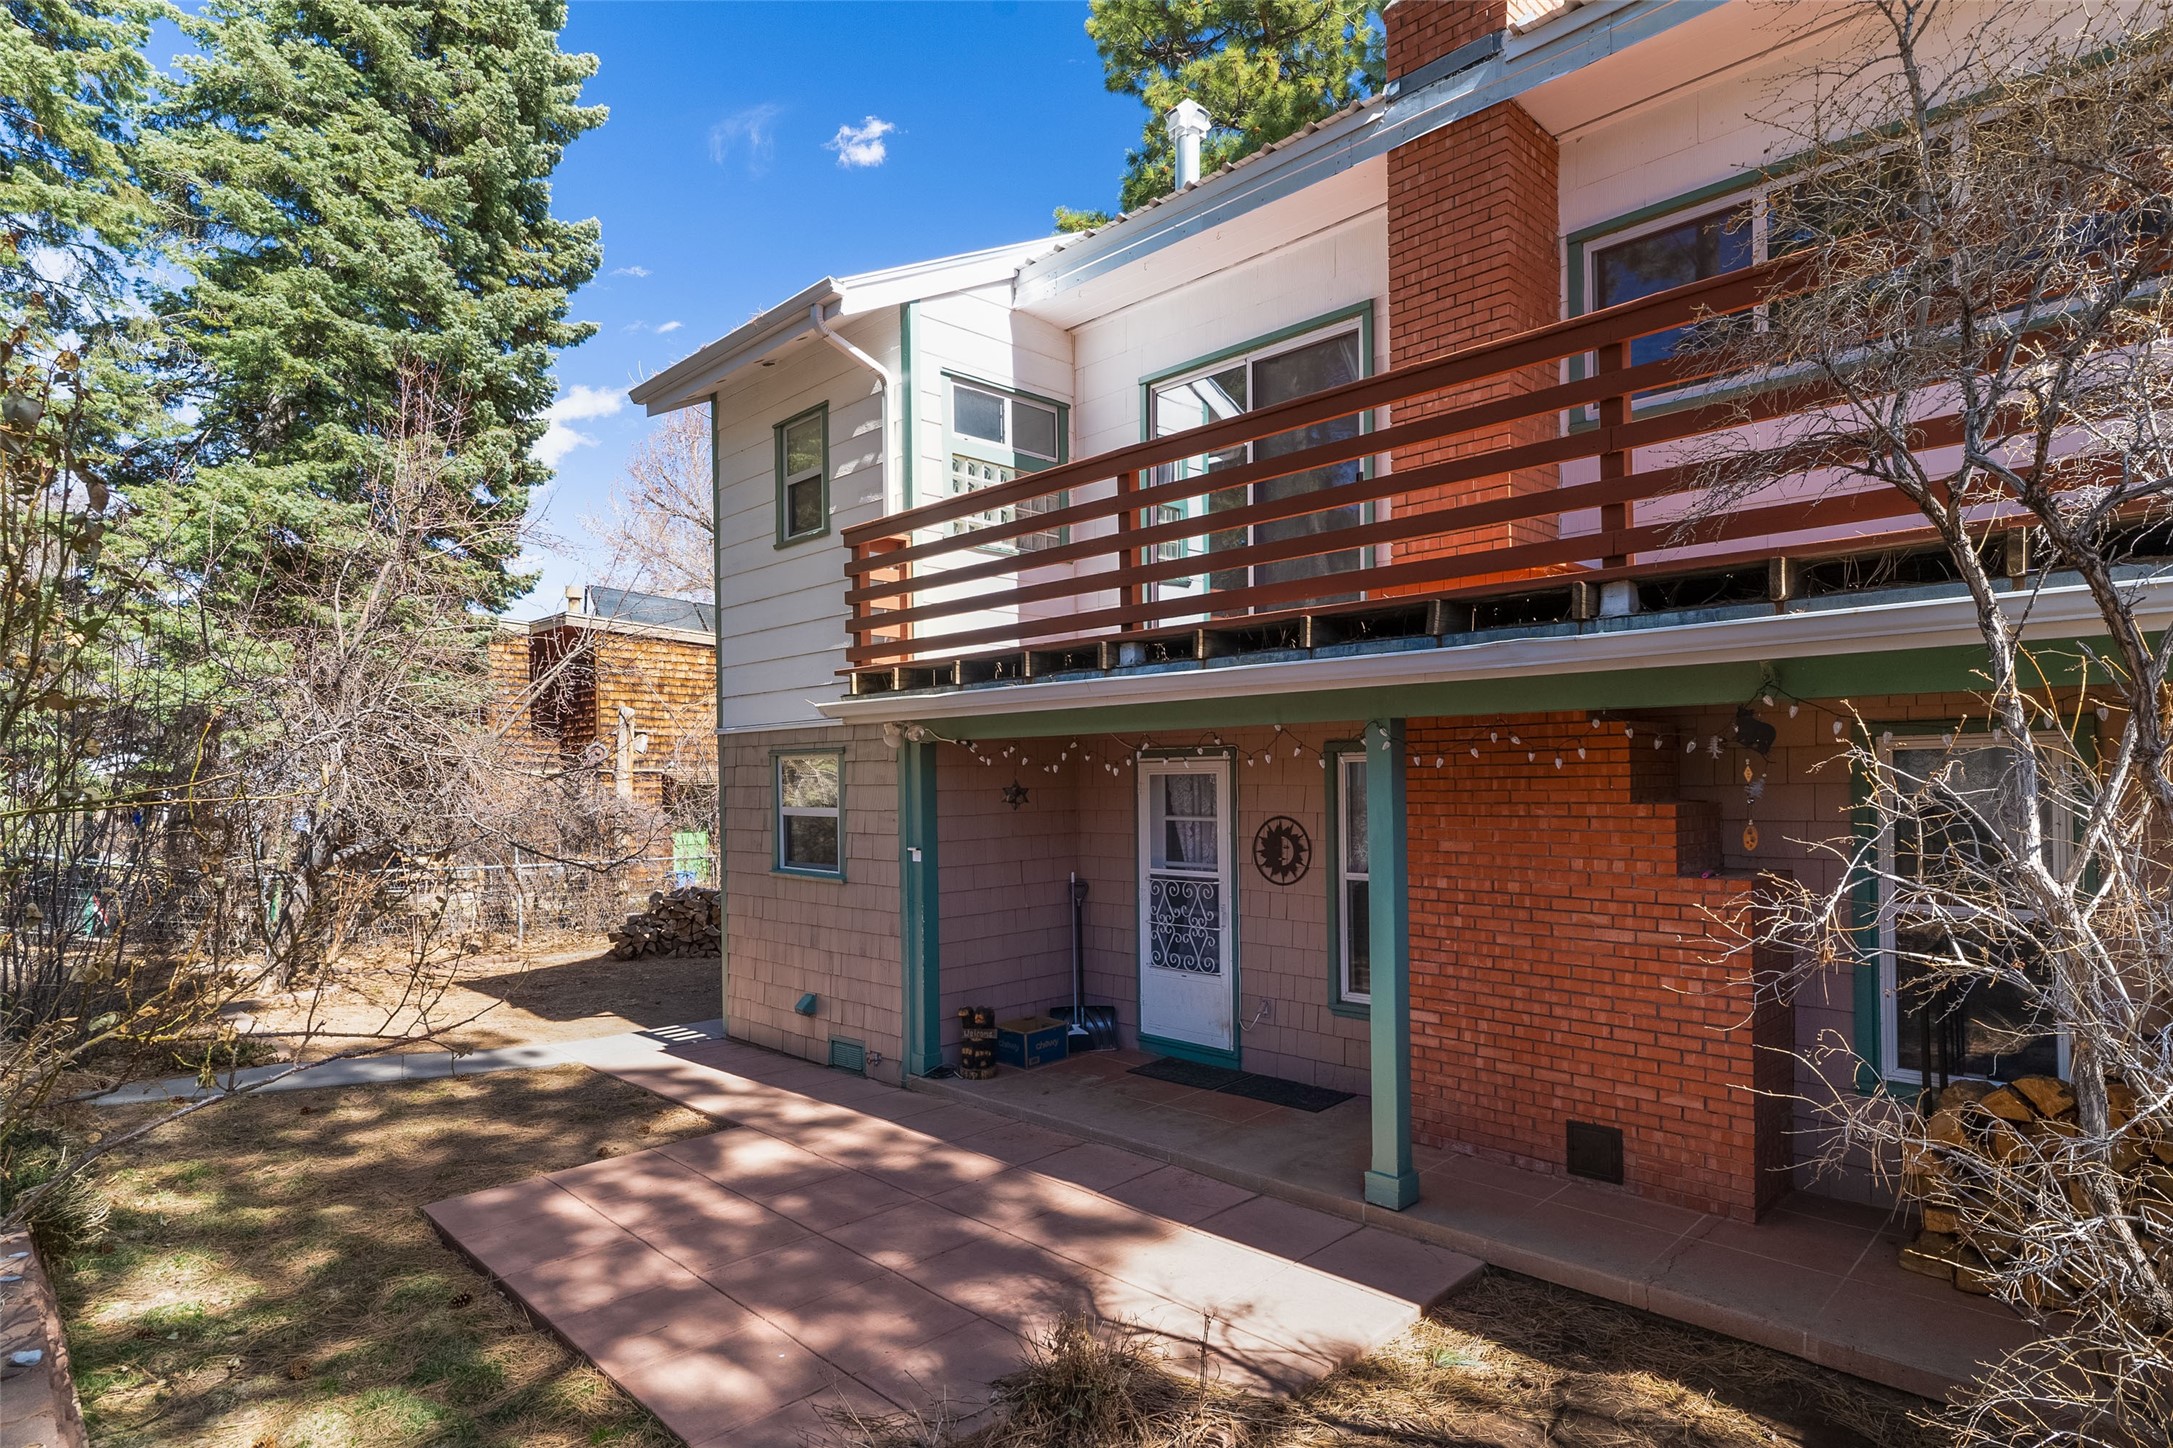 2021 45th B, Los Alamos, New Mexico 87544, 3 Bedrooms Bedrooms, ,2 BathroomsBathrooms,Residential,For Sale,2021 45th B,202400744